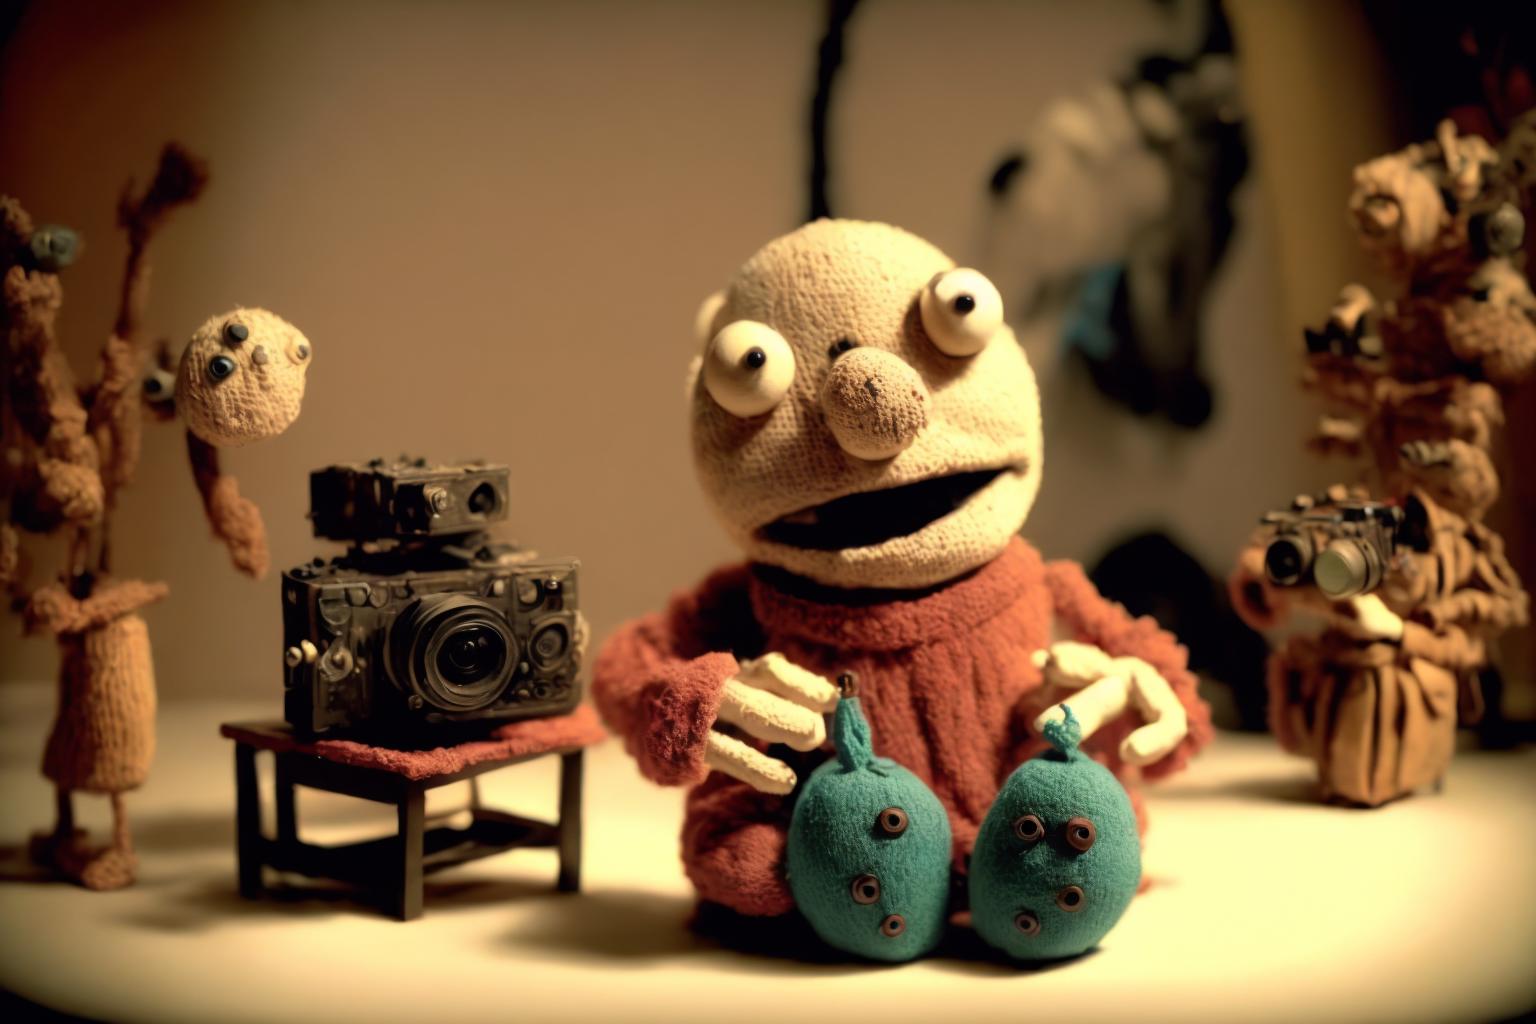 Stop-Motion Animation image by Shivae